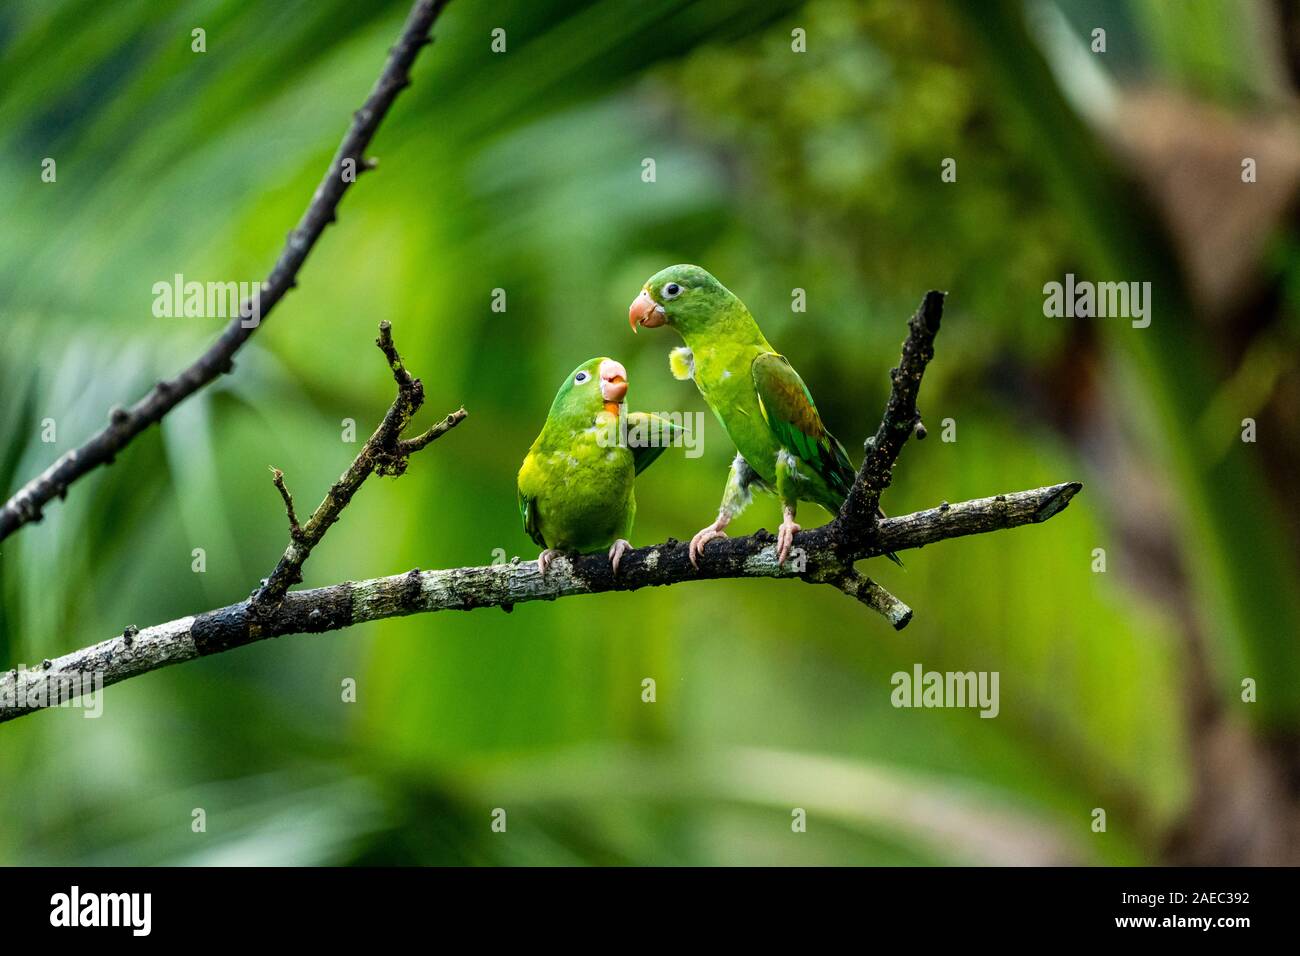 Two Orange-chinned Parakeets (Brotogeris jugularis) perched on a branch, interacting, Photographed in the wild, Costa Rica, Central America. Stock Photo